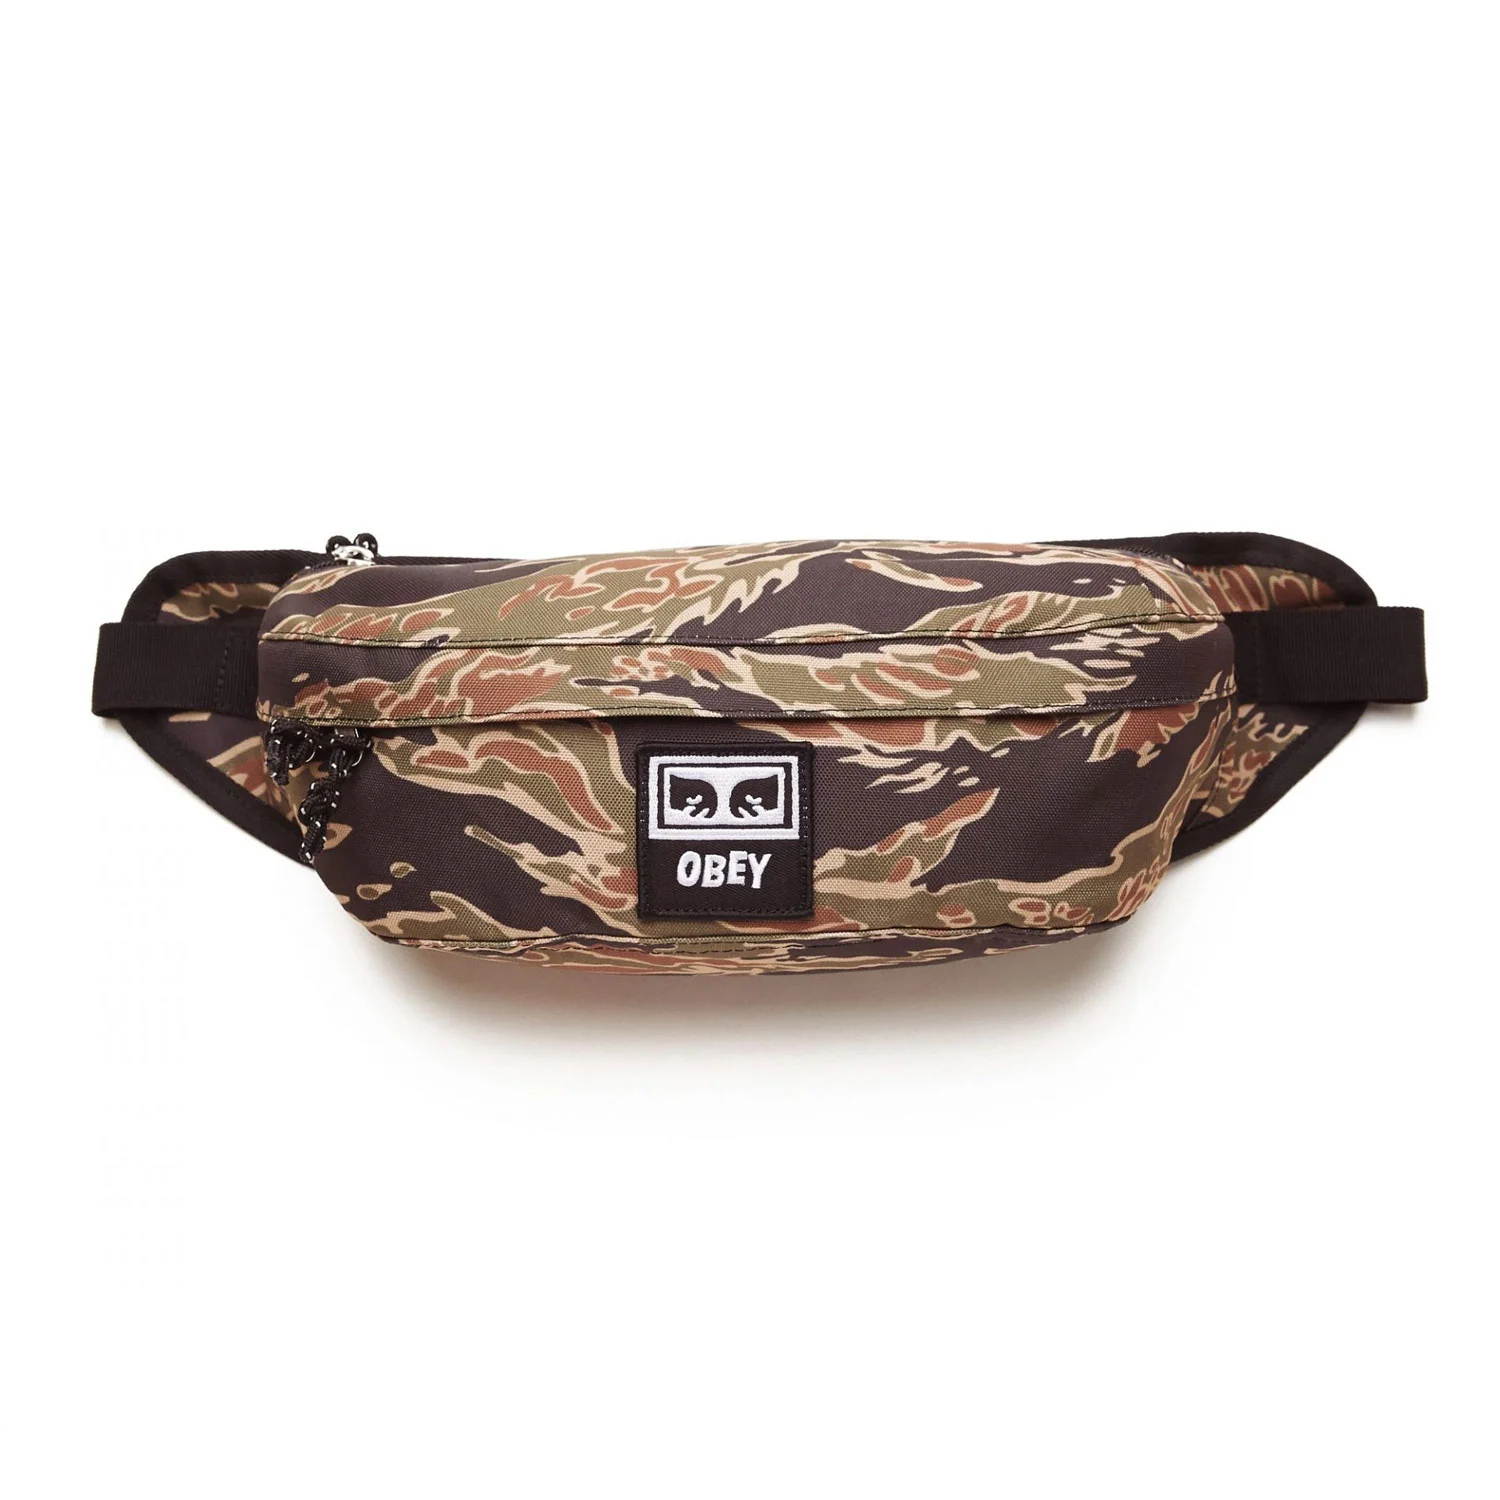 Obey Drop Out Sling Pack - Tiger Camo